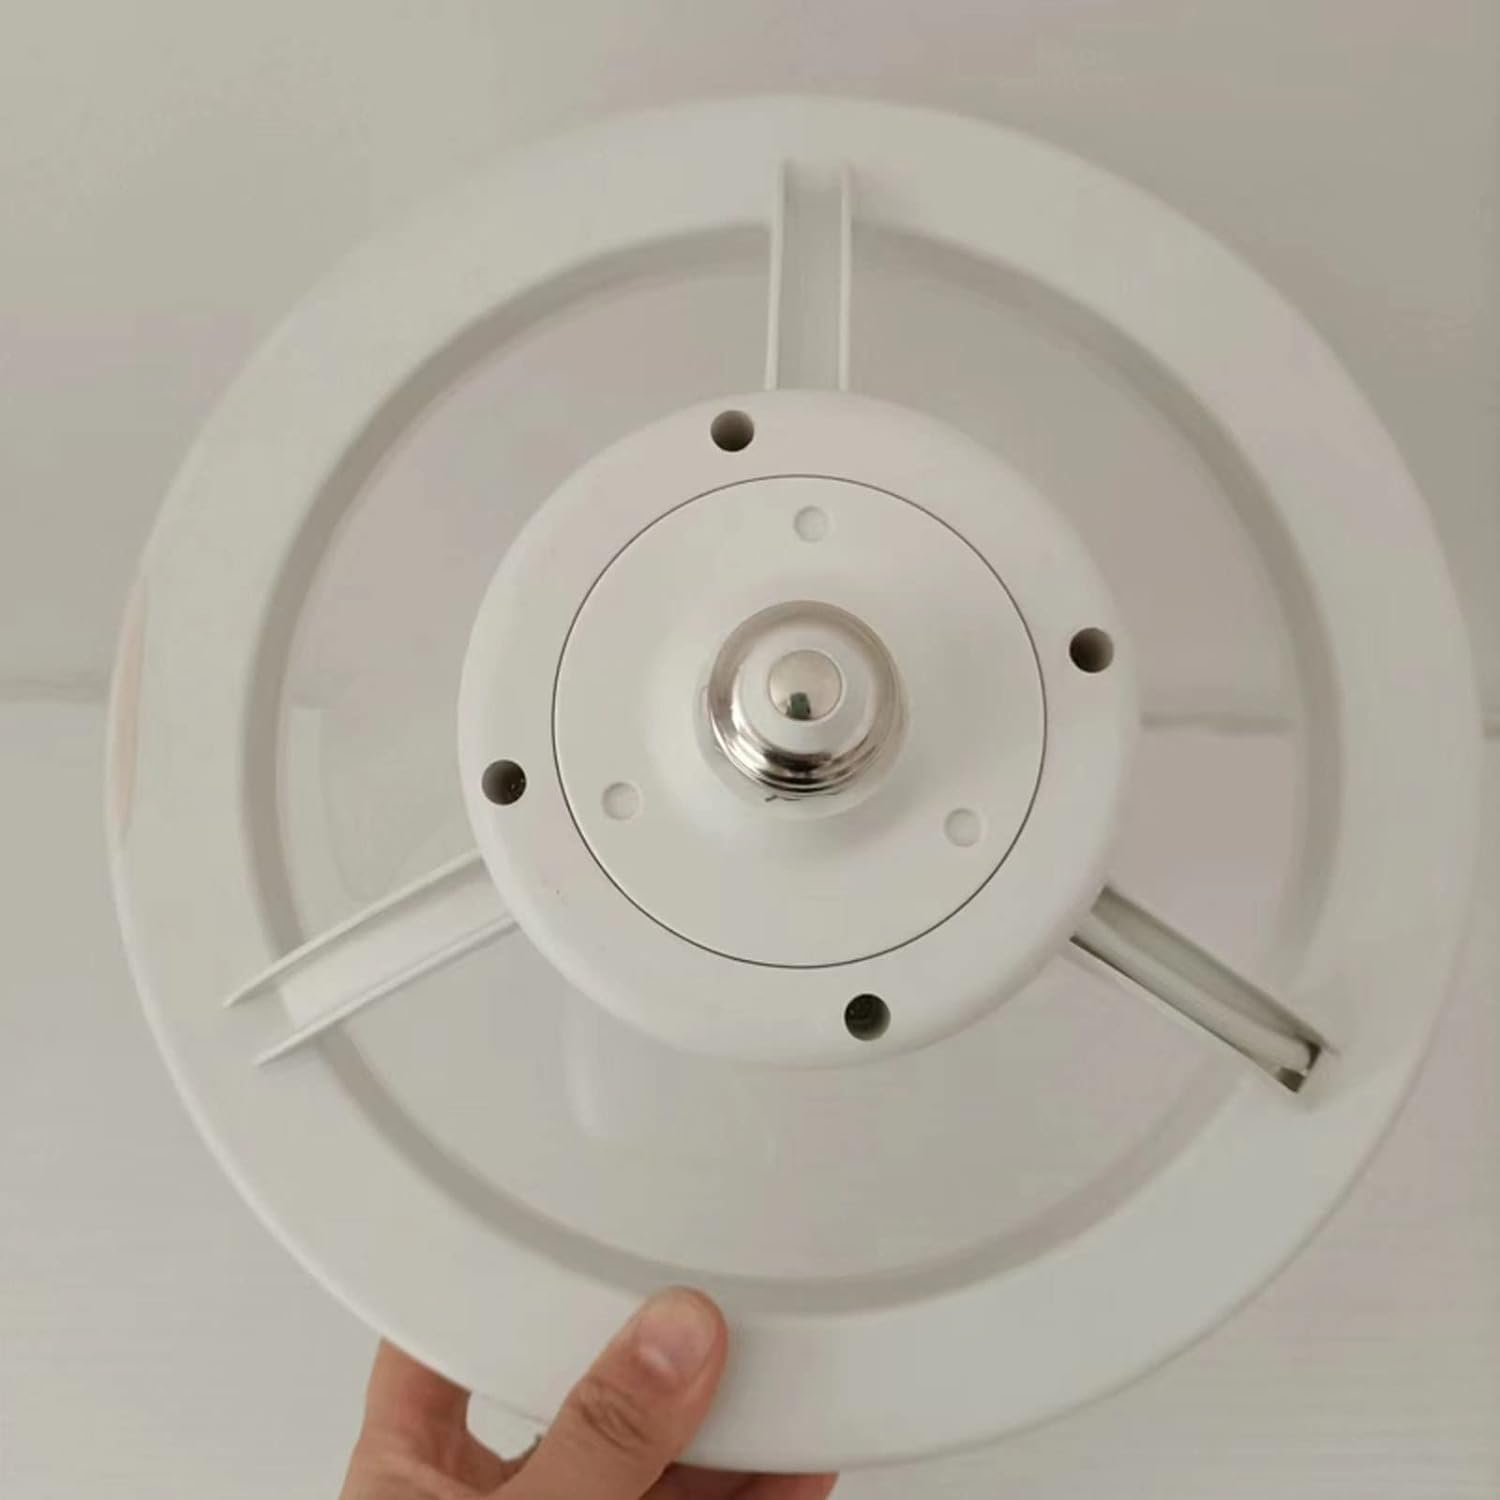 Someone is holding the 360° Rotation LED Fan Light